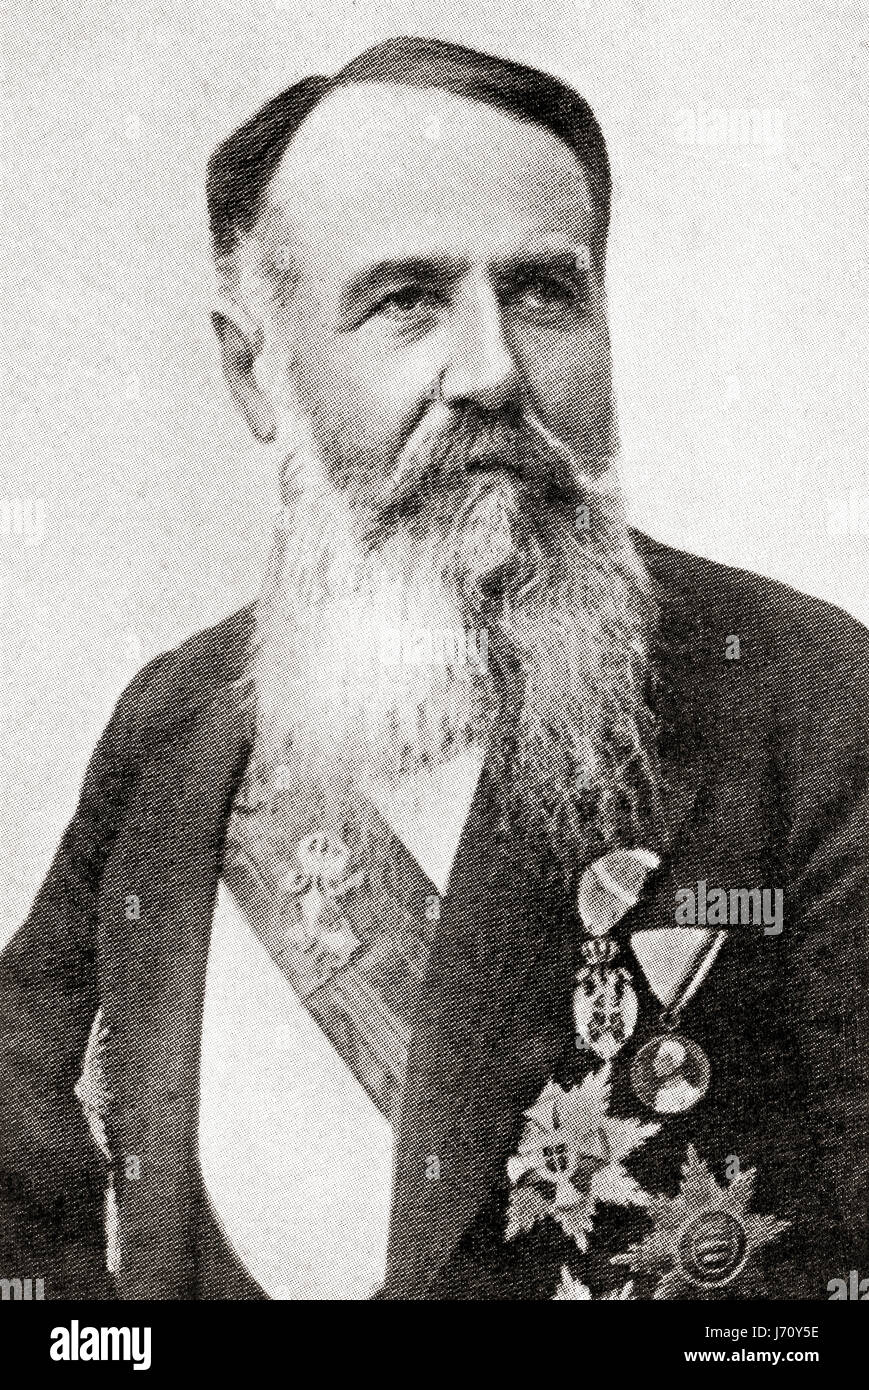 Nikola Pašić, 1845 – 1926. Serbian and Yugoslav politician, diplomat and Prime Minister of Yugoslavia.  From Hutchinson's History of the Nations, published 1915. Stock Photo